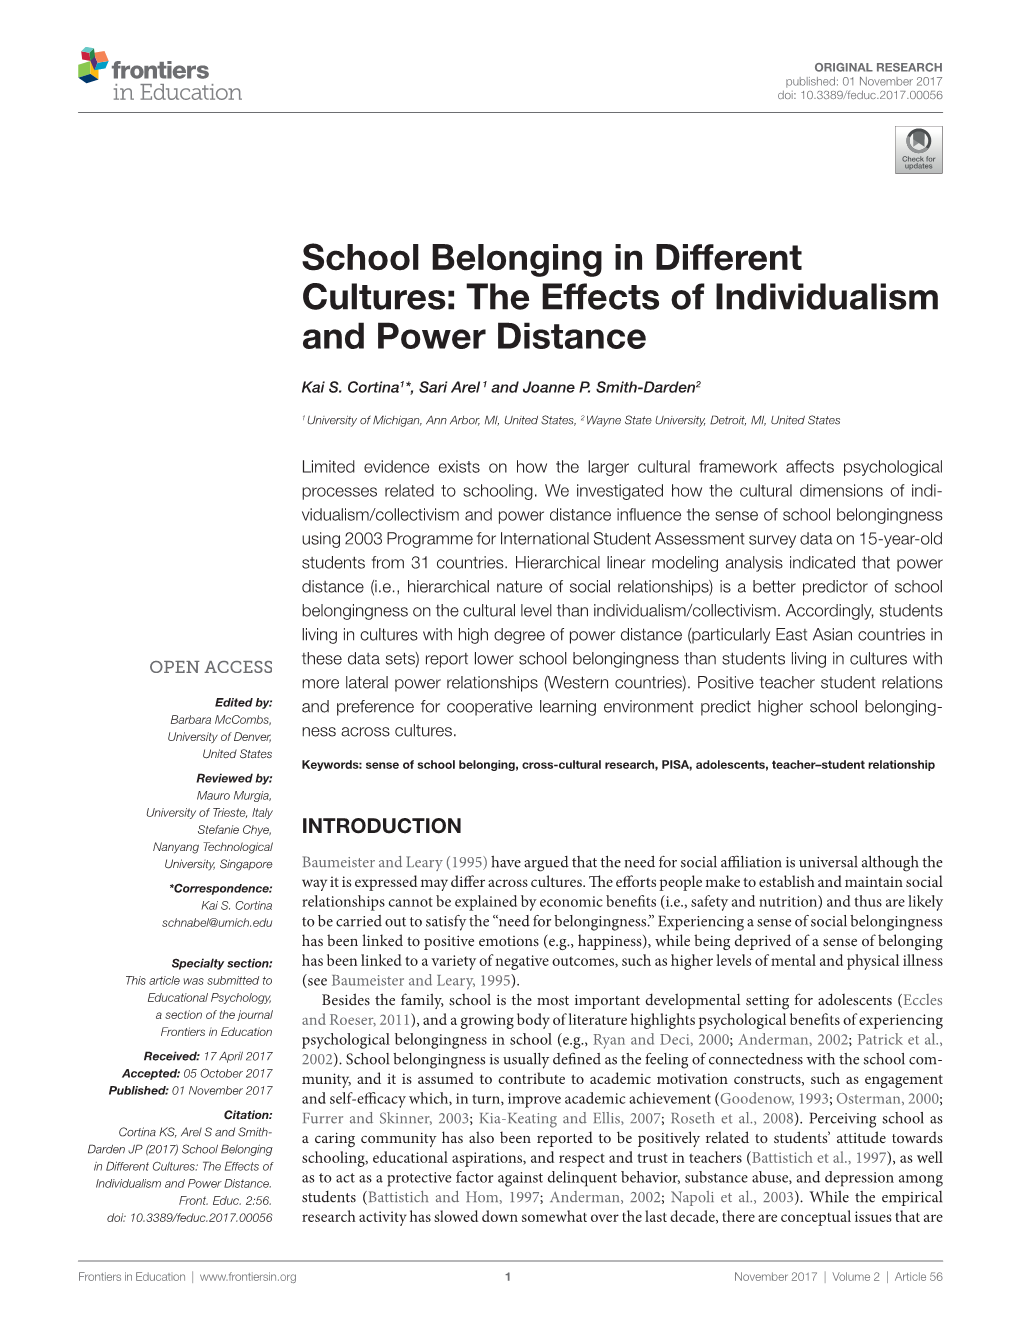 School Belonging in Different Cultures: the Effects of Individualism and Power Distance